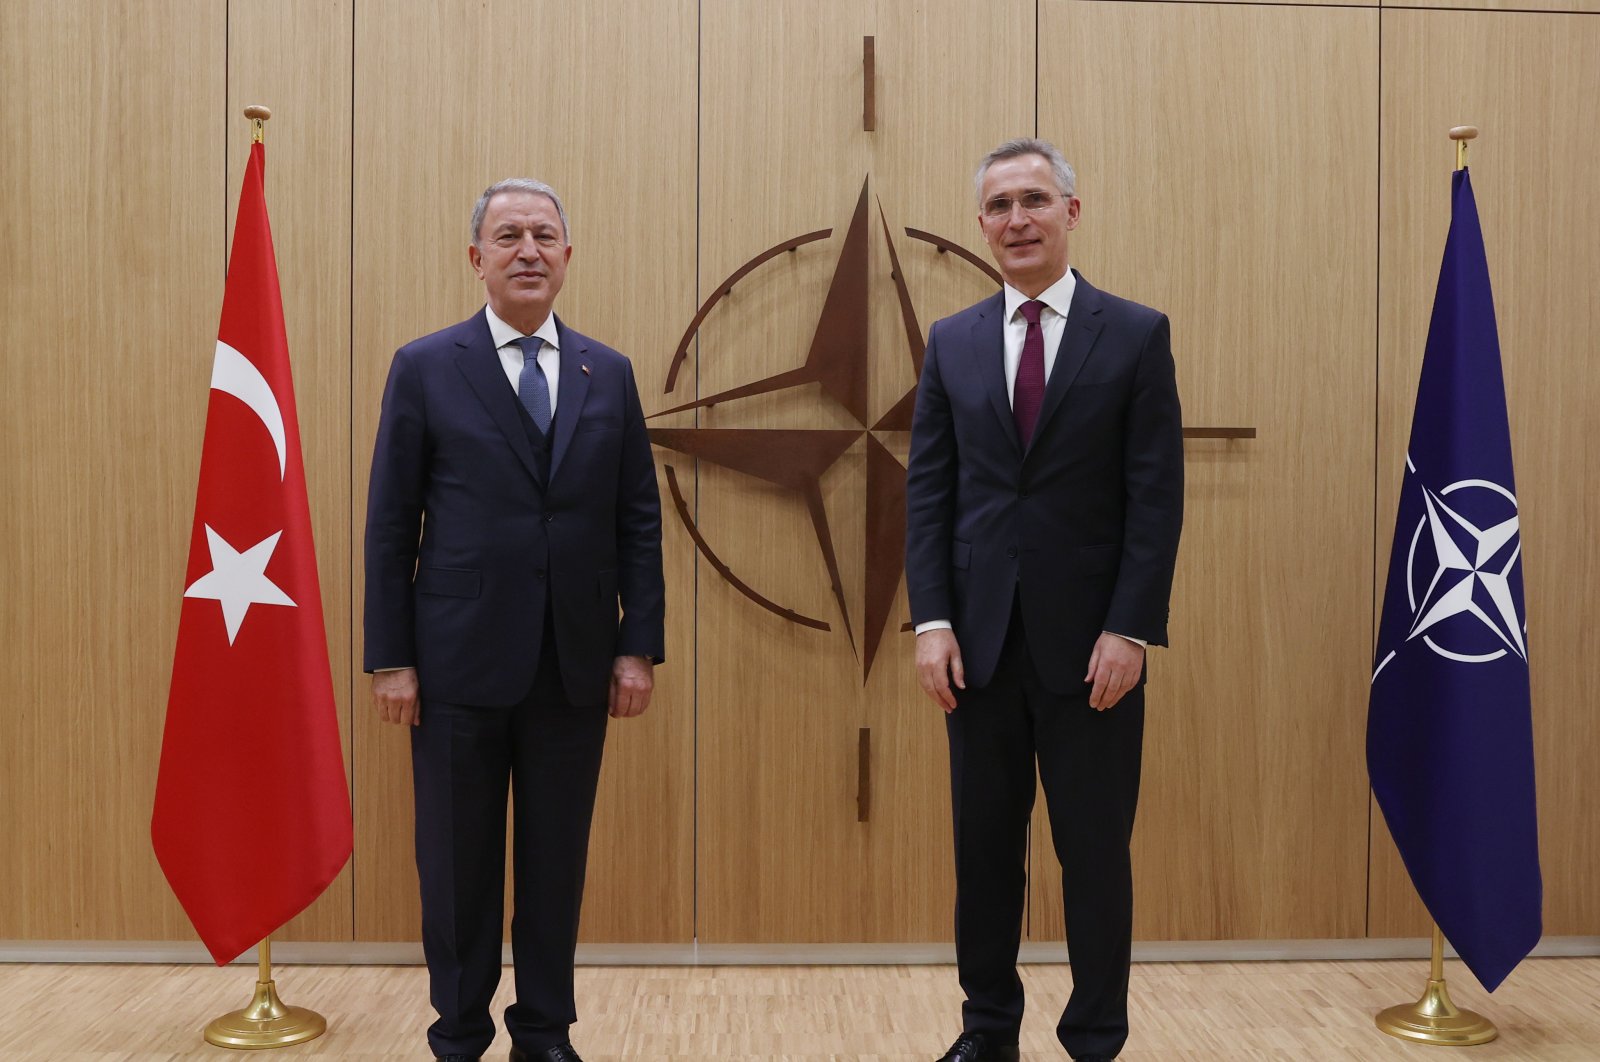 Defense Minister Hulusi Akar poses with NATO Secretary-General Jens Stoltenberg at the NATO headquarters in Brussels, Belgium, Feb. 16, 2022. (AA Photo)